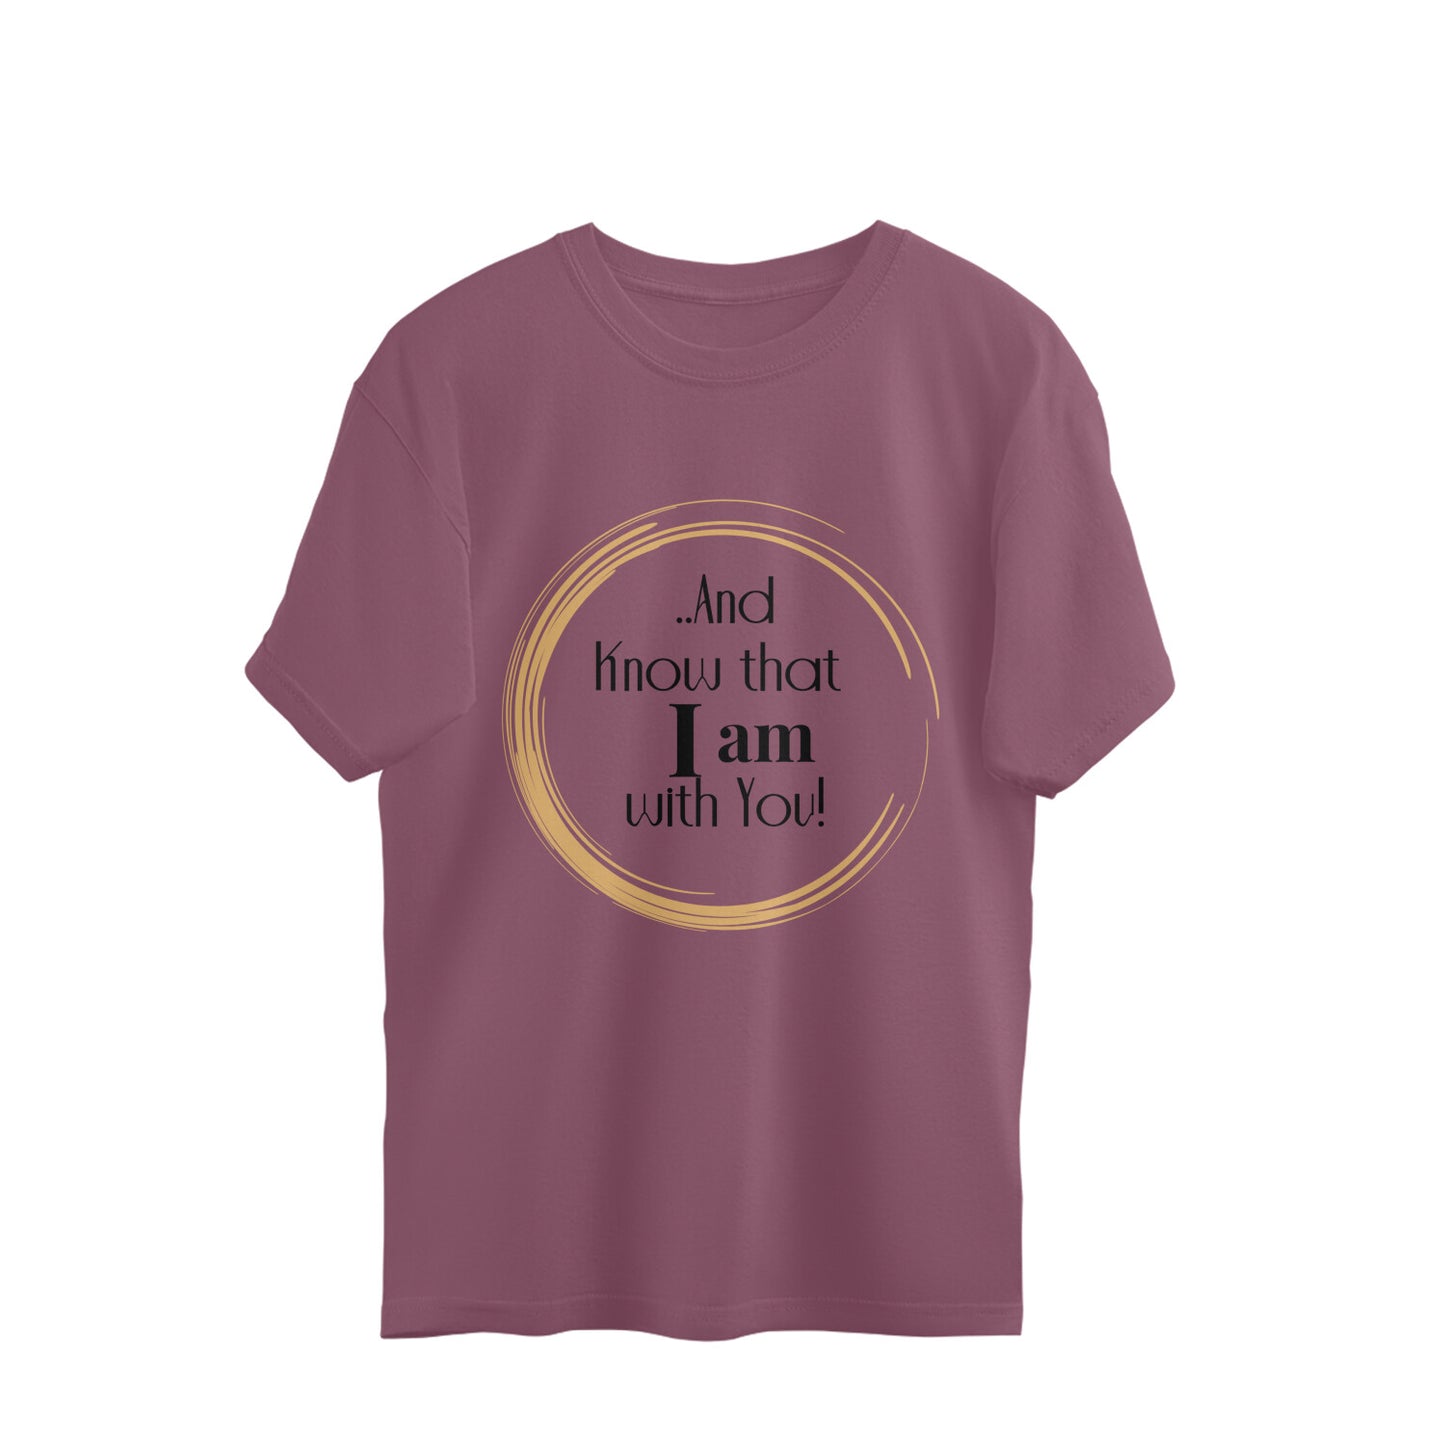 I am with you-  large tee